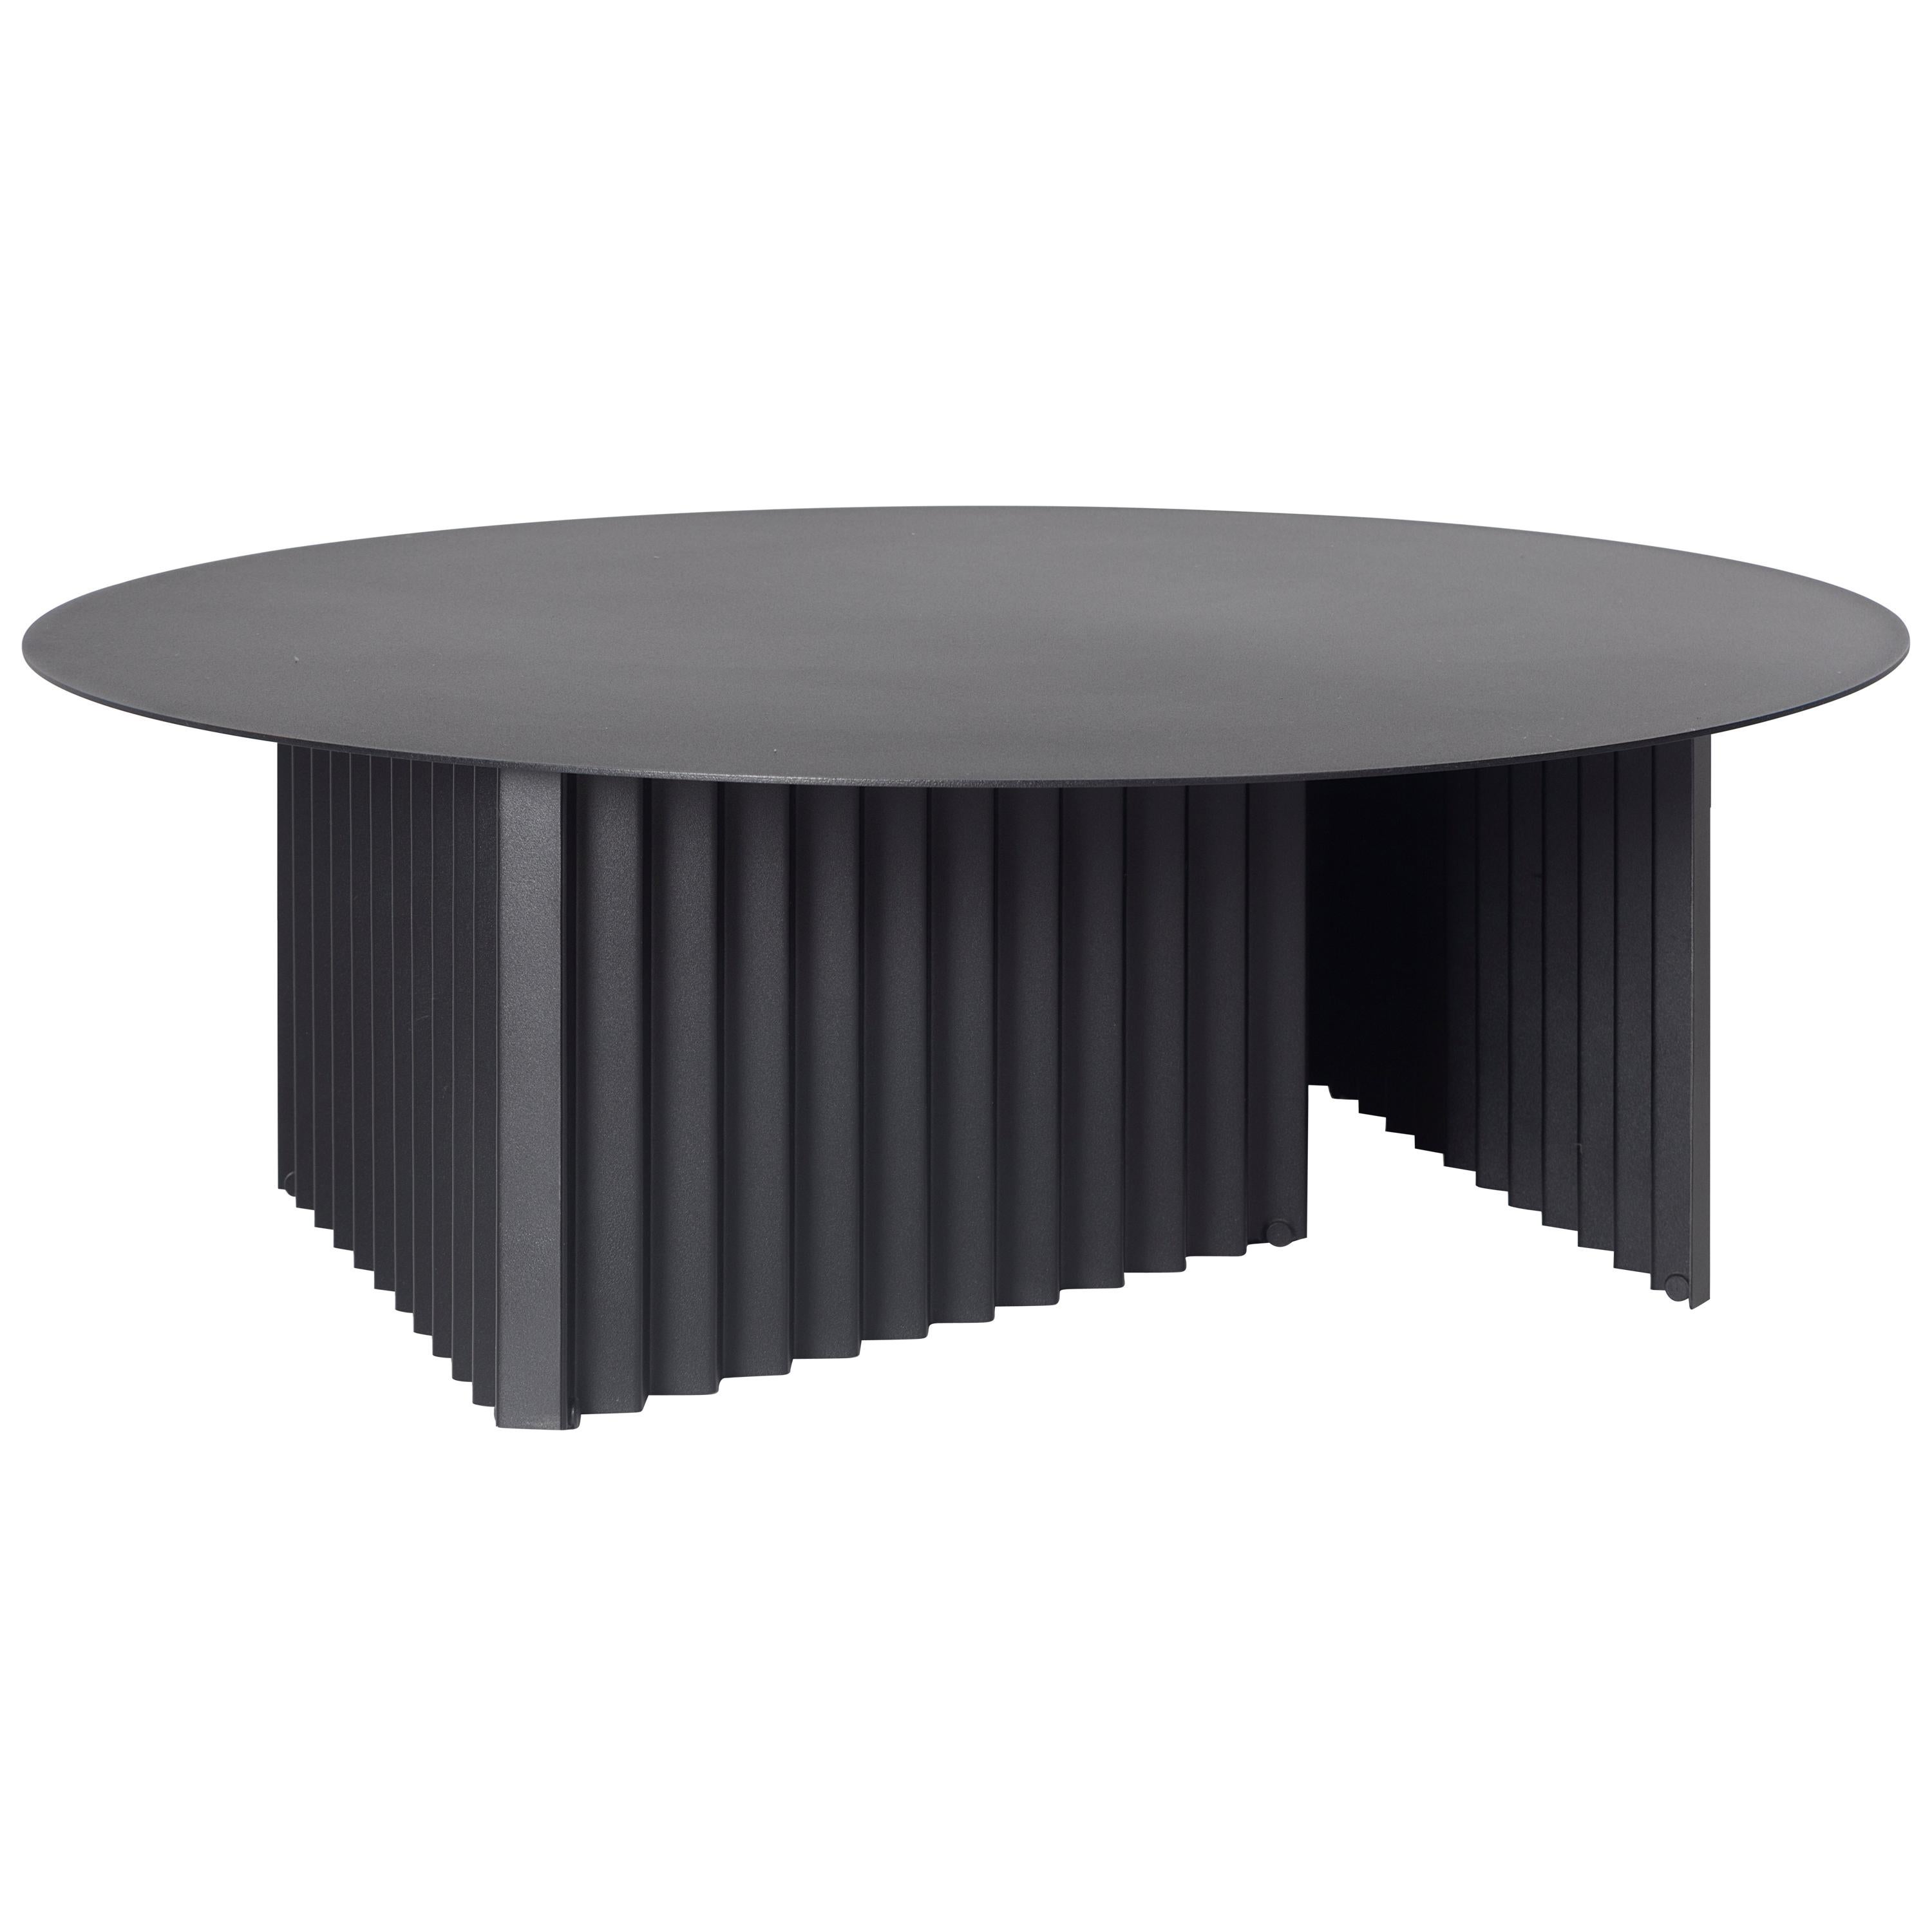 RS Barcelona Plec Round Large Table in Black Metal by A.P.O.